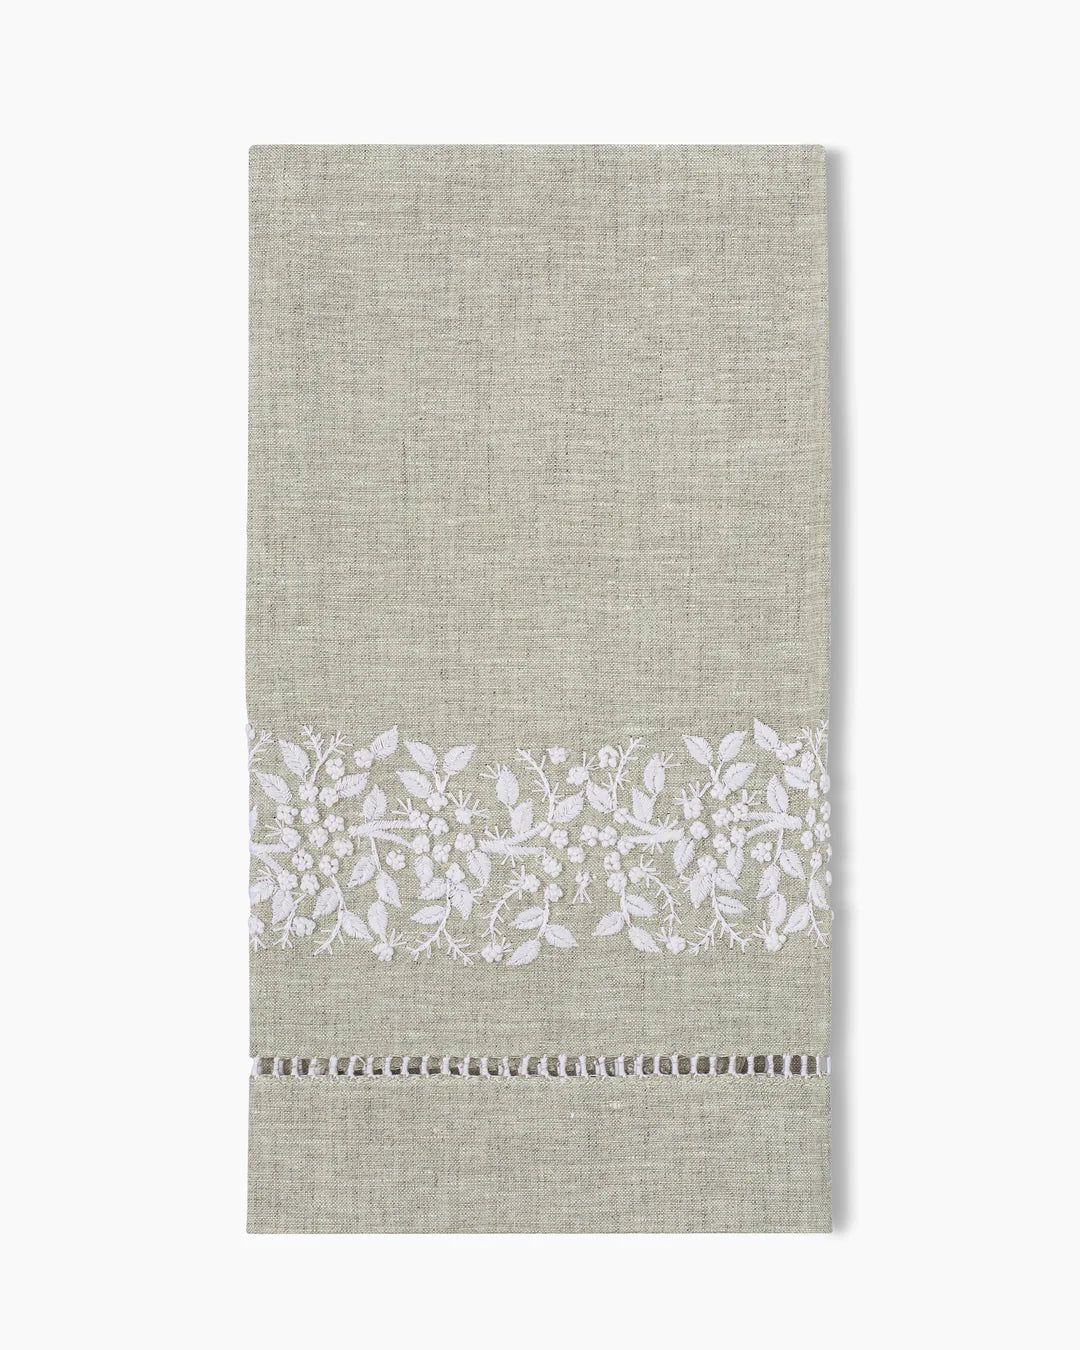 Jardin Classic Linen Hand Towels in Natural, Set of Two